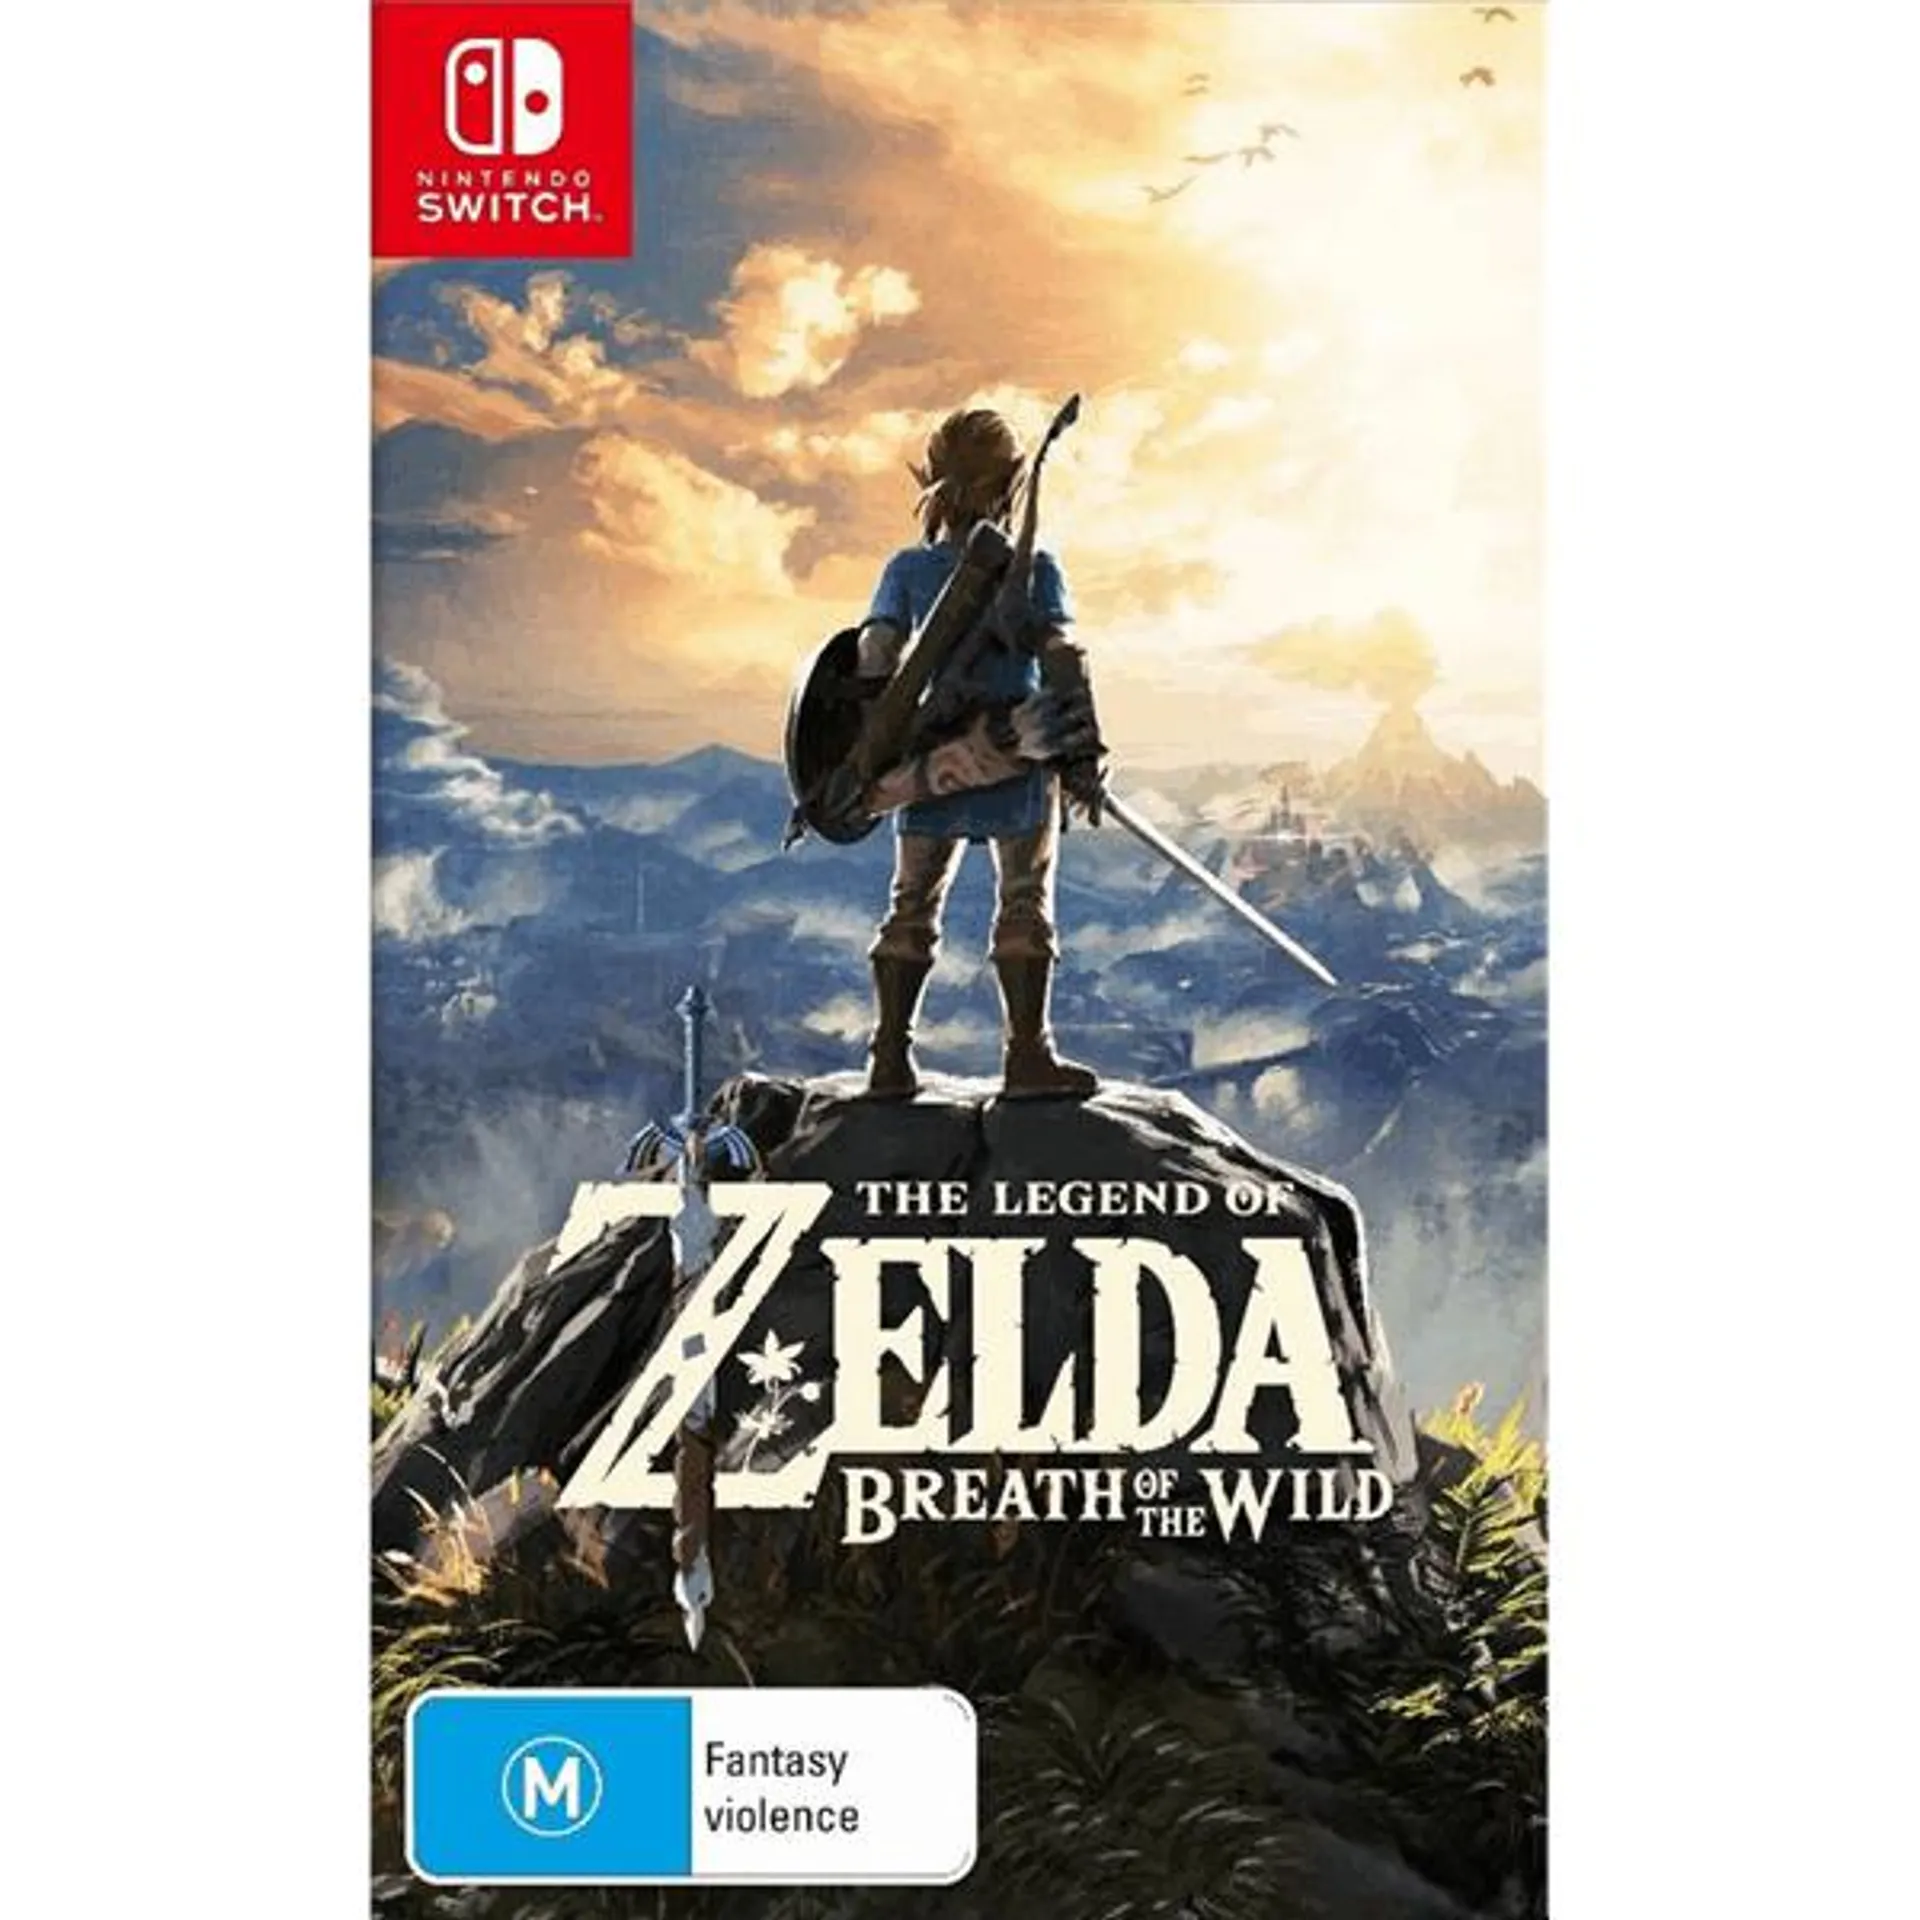 The Legend of Zelda: Breath of the Wild (preowned)